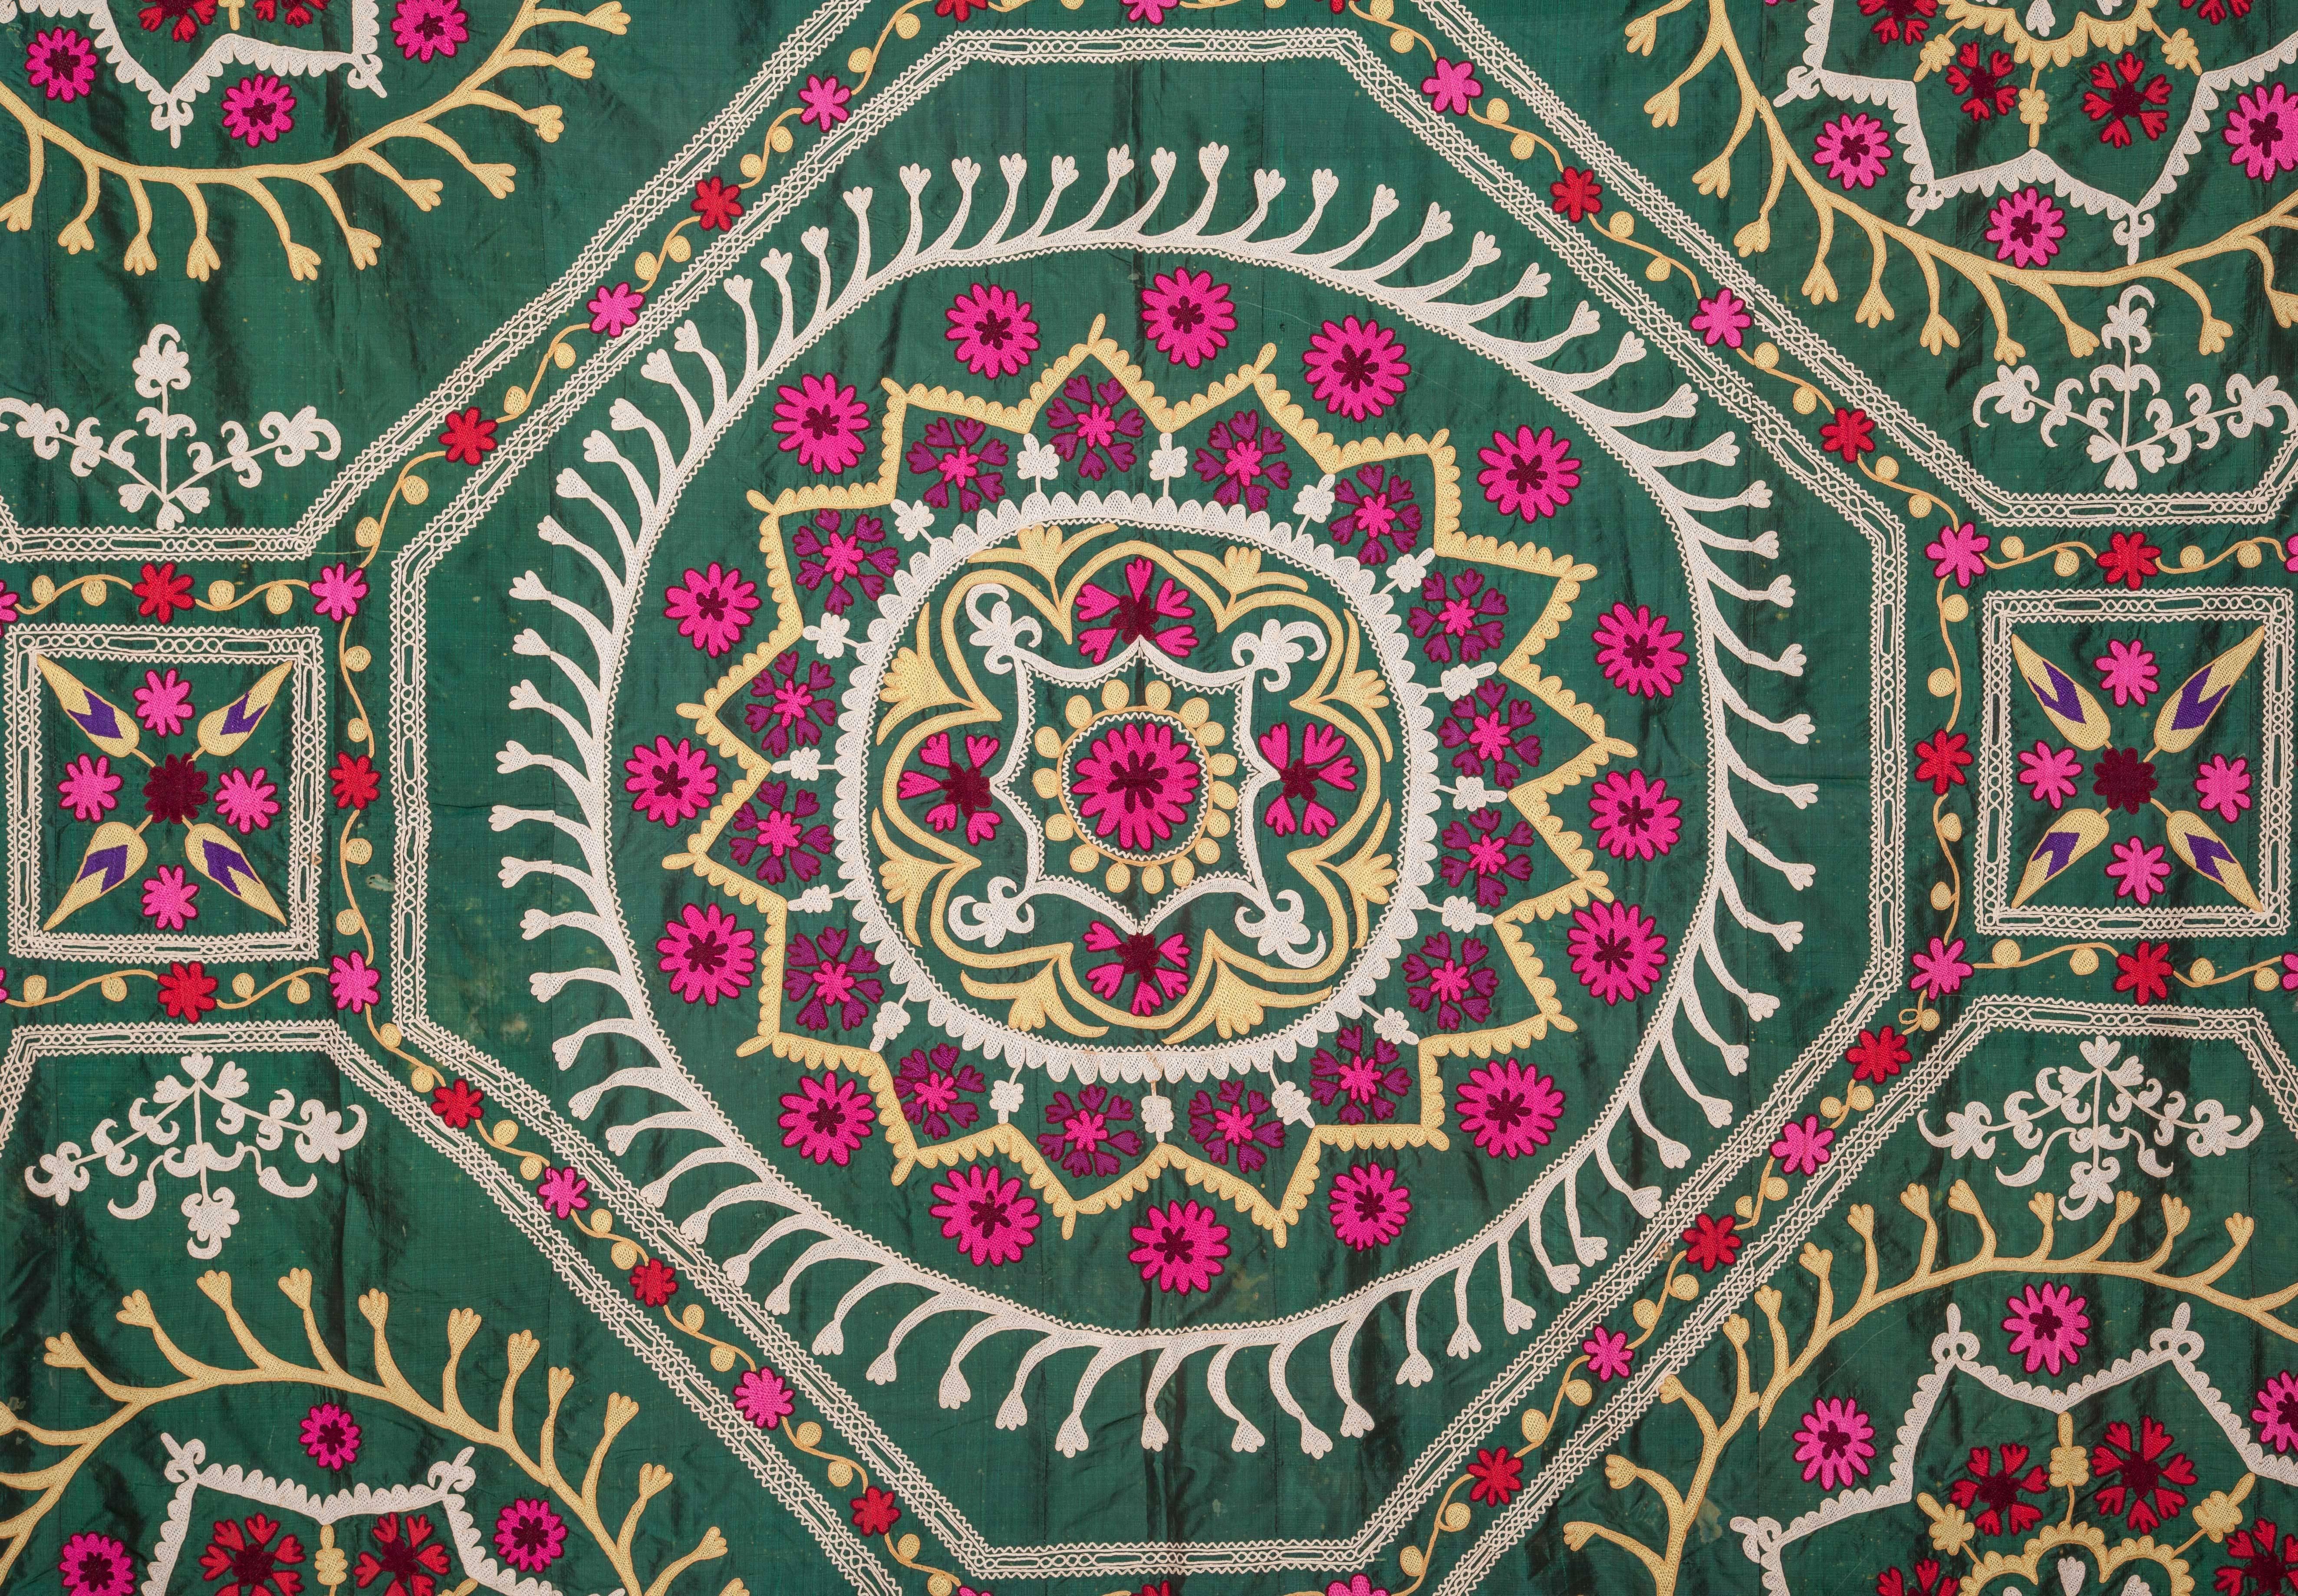 A good example in reasonably good condition. Silk embroidery done on silk background.